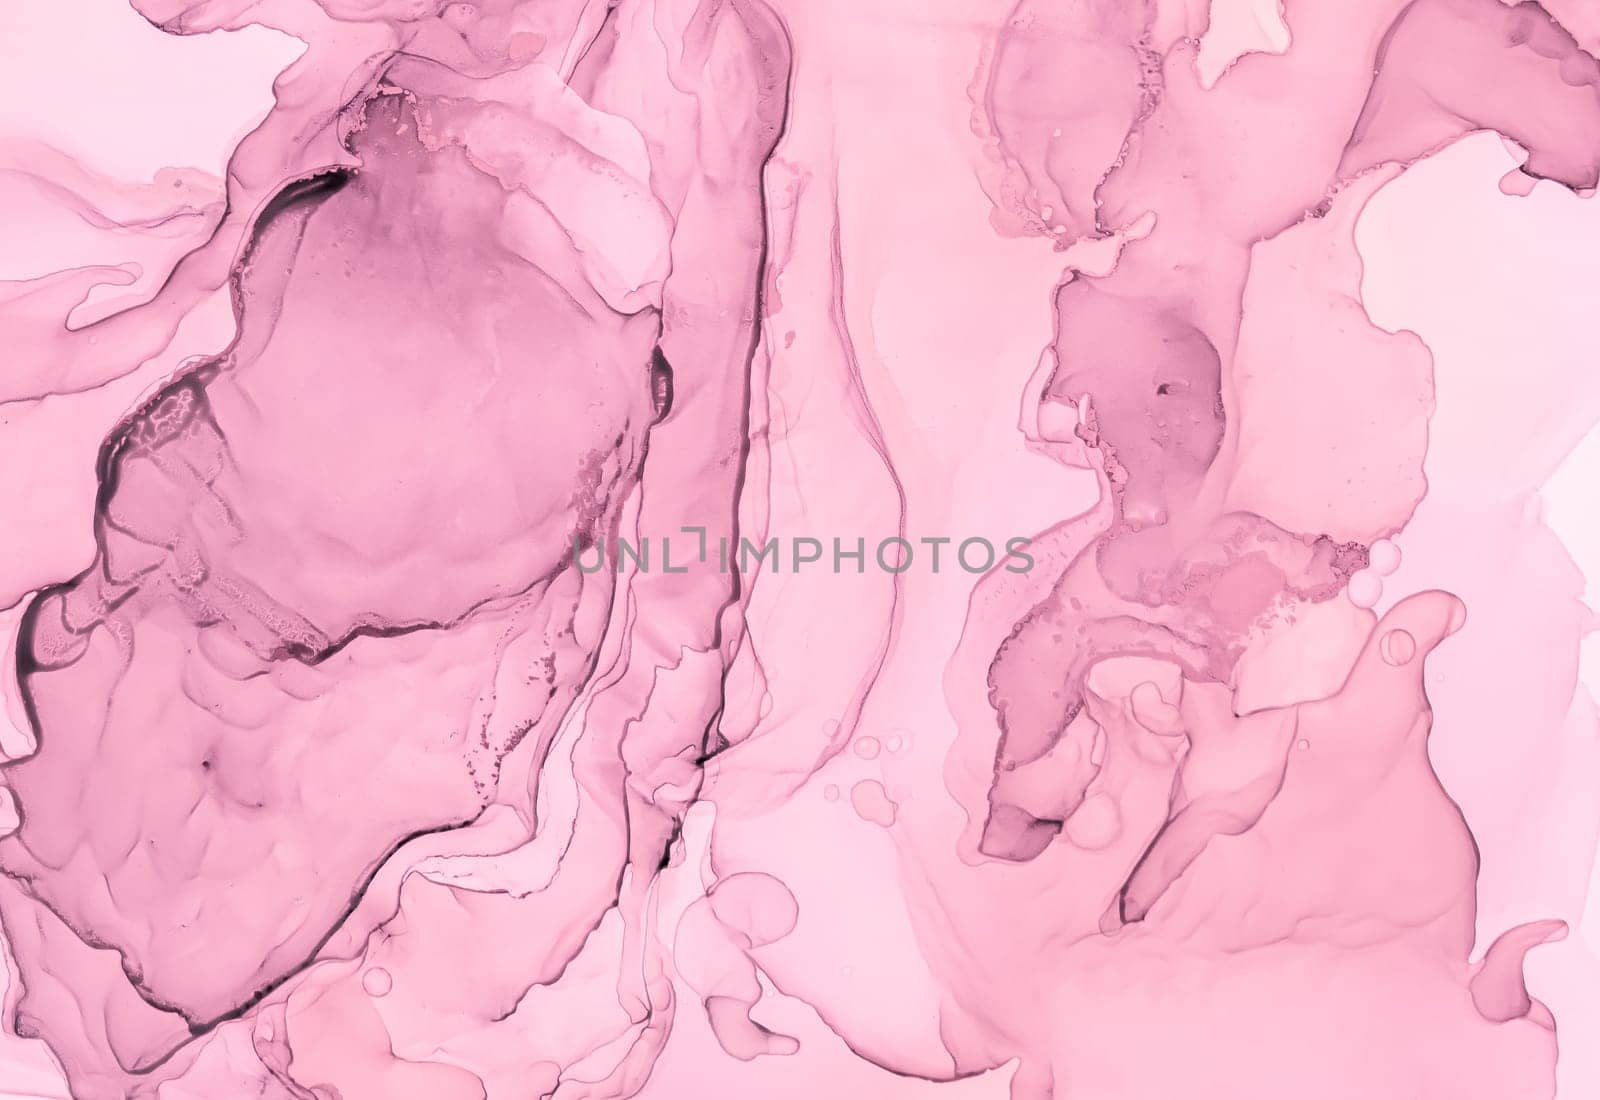 Gentle Liquid Marble. Abstract Background. Fluid Flow Effect. Acrylic Paper. Delicate Art Paint. Alcohol Luxury Marble. Elegant Mix. Ink Modern Texture. Contemporary Pink Marble.